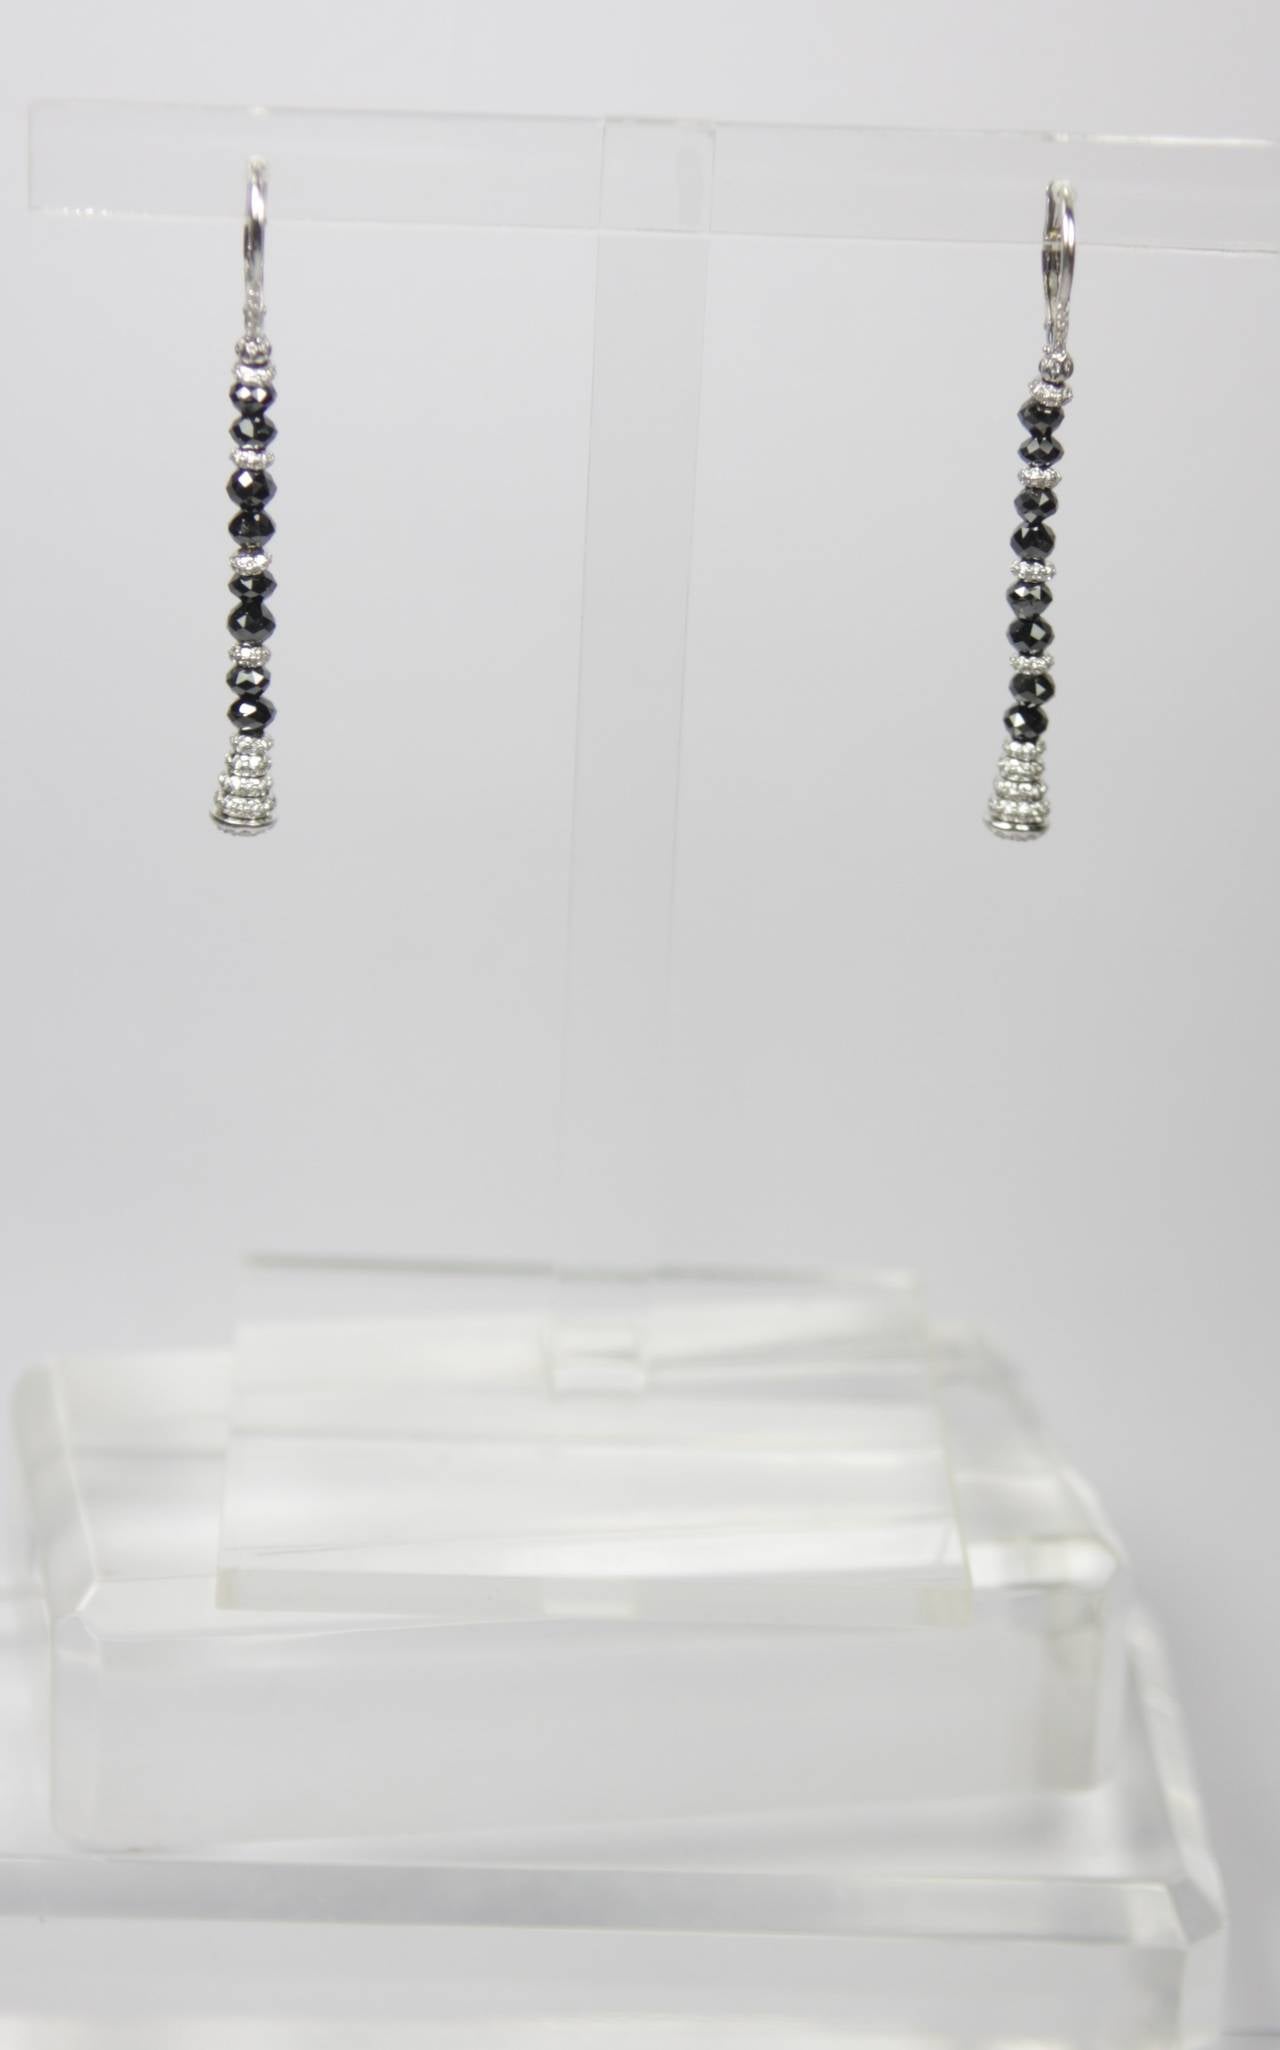 These earrings are composed of 18kt white gold and feature rose cut black diamonds and round cut white diamonds. Drop style with hinge closure.

Specs: 
18 KT White Gold 
Diamonds: 1.55 Carats Approximate Total Weight
Measures: 2.25